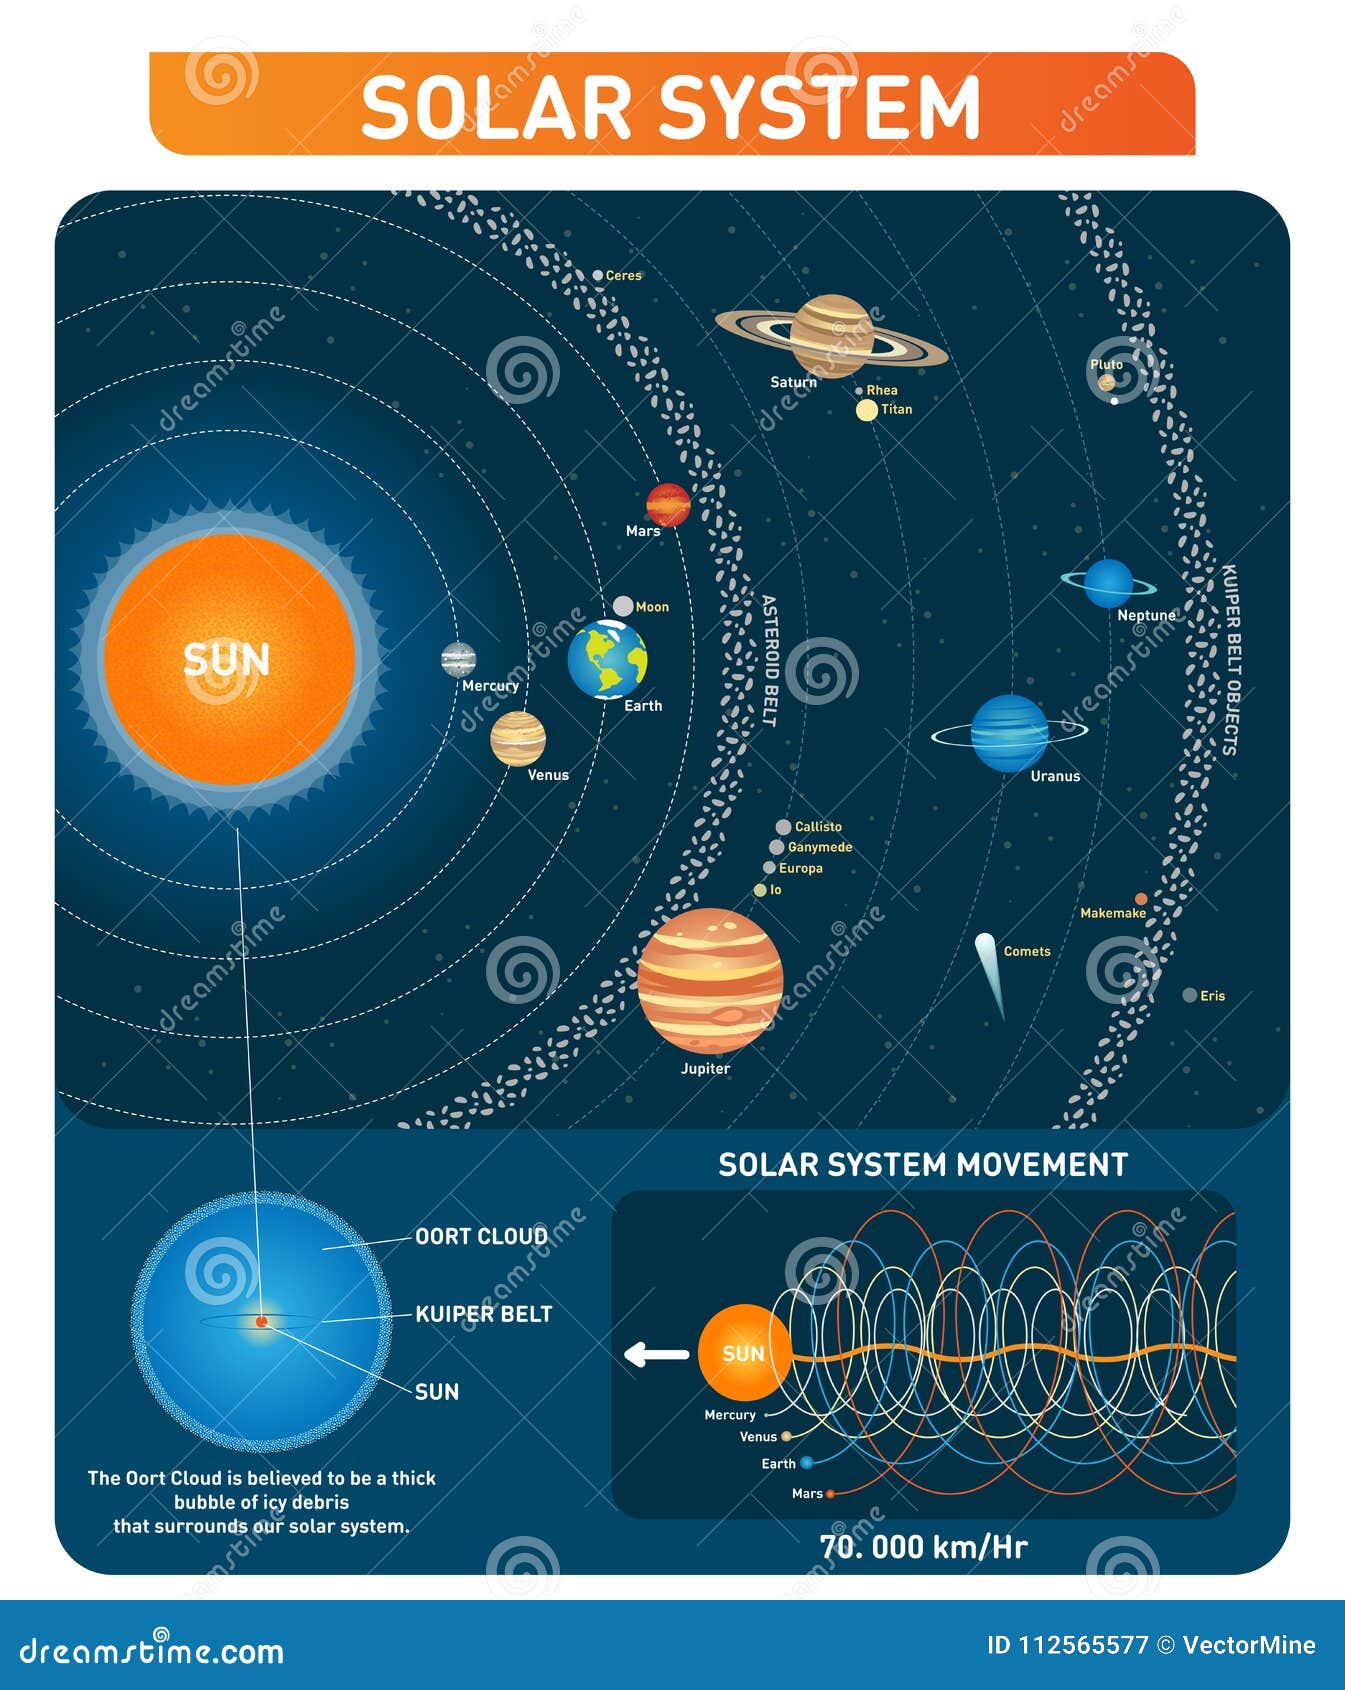 solar system planets, sun, asteroid belt, kuiper belt and other main objects. space exploration   collection.